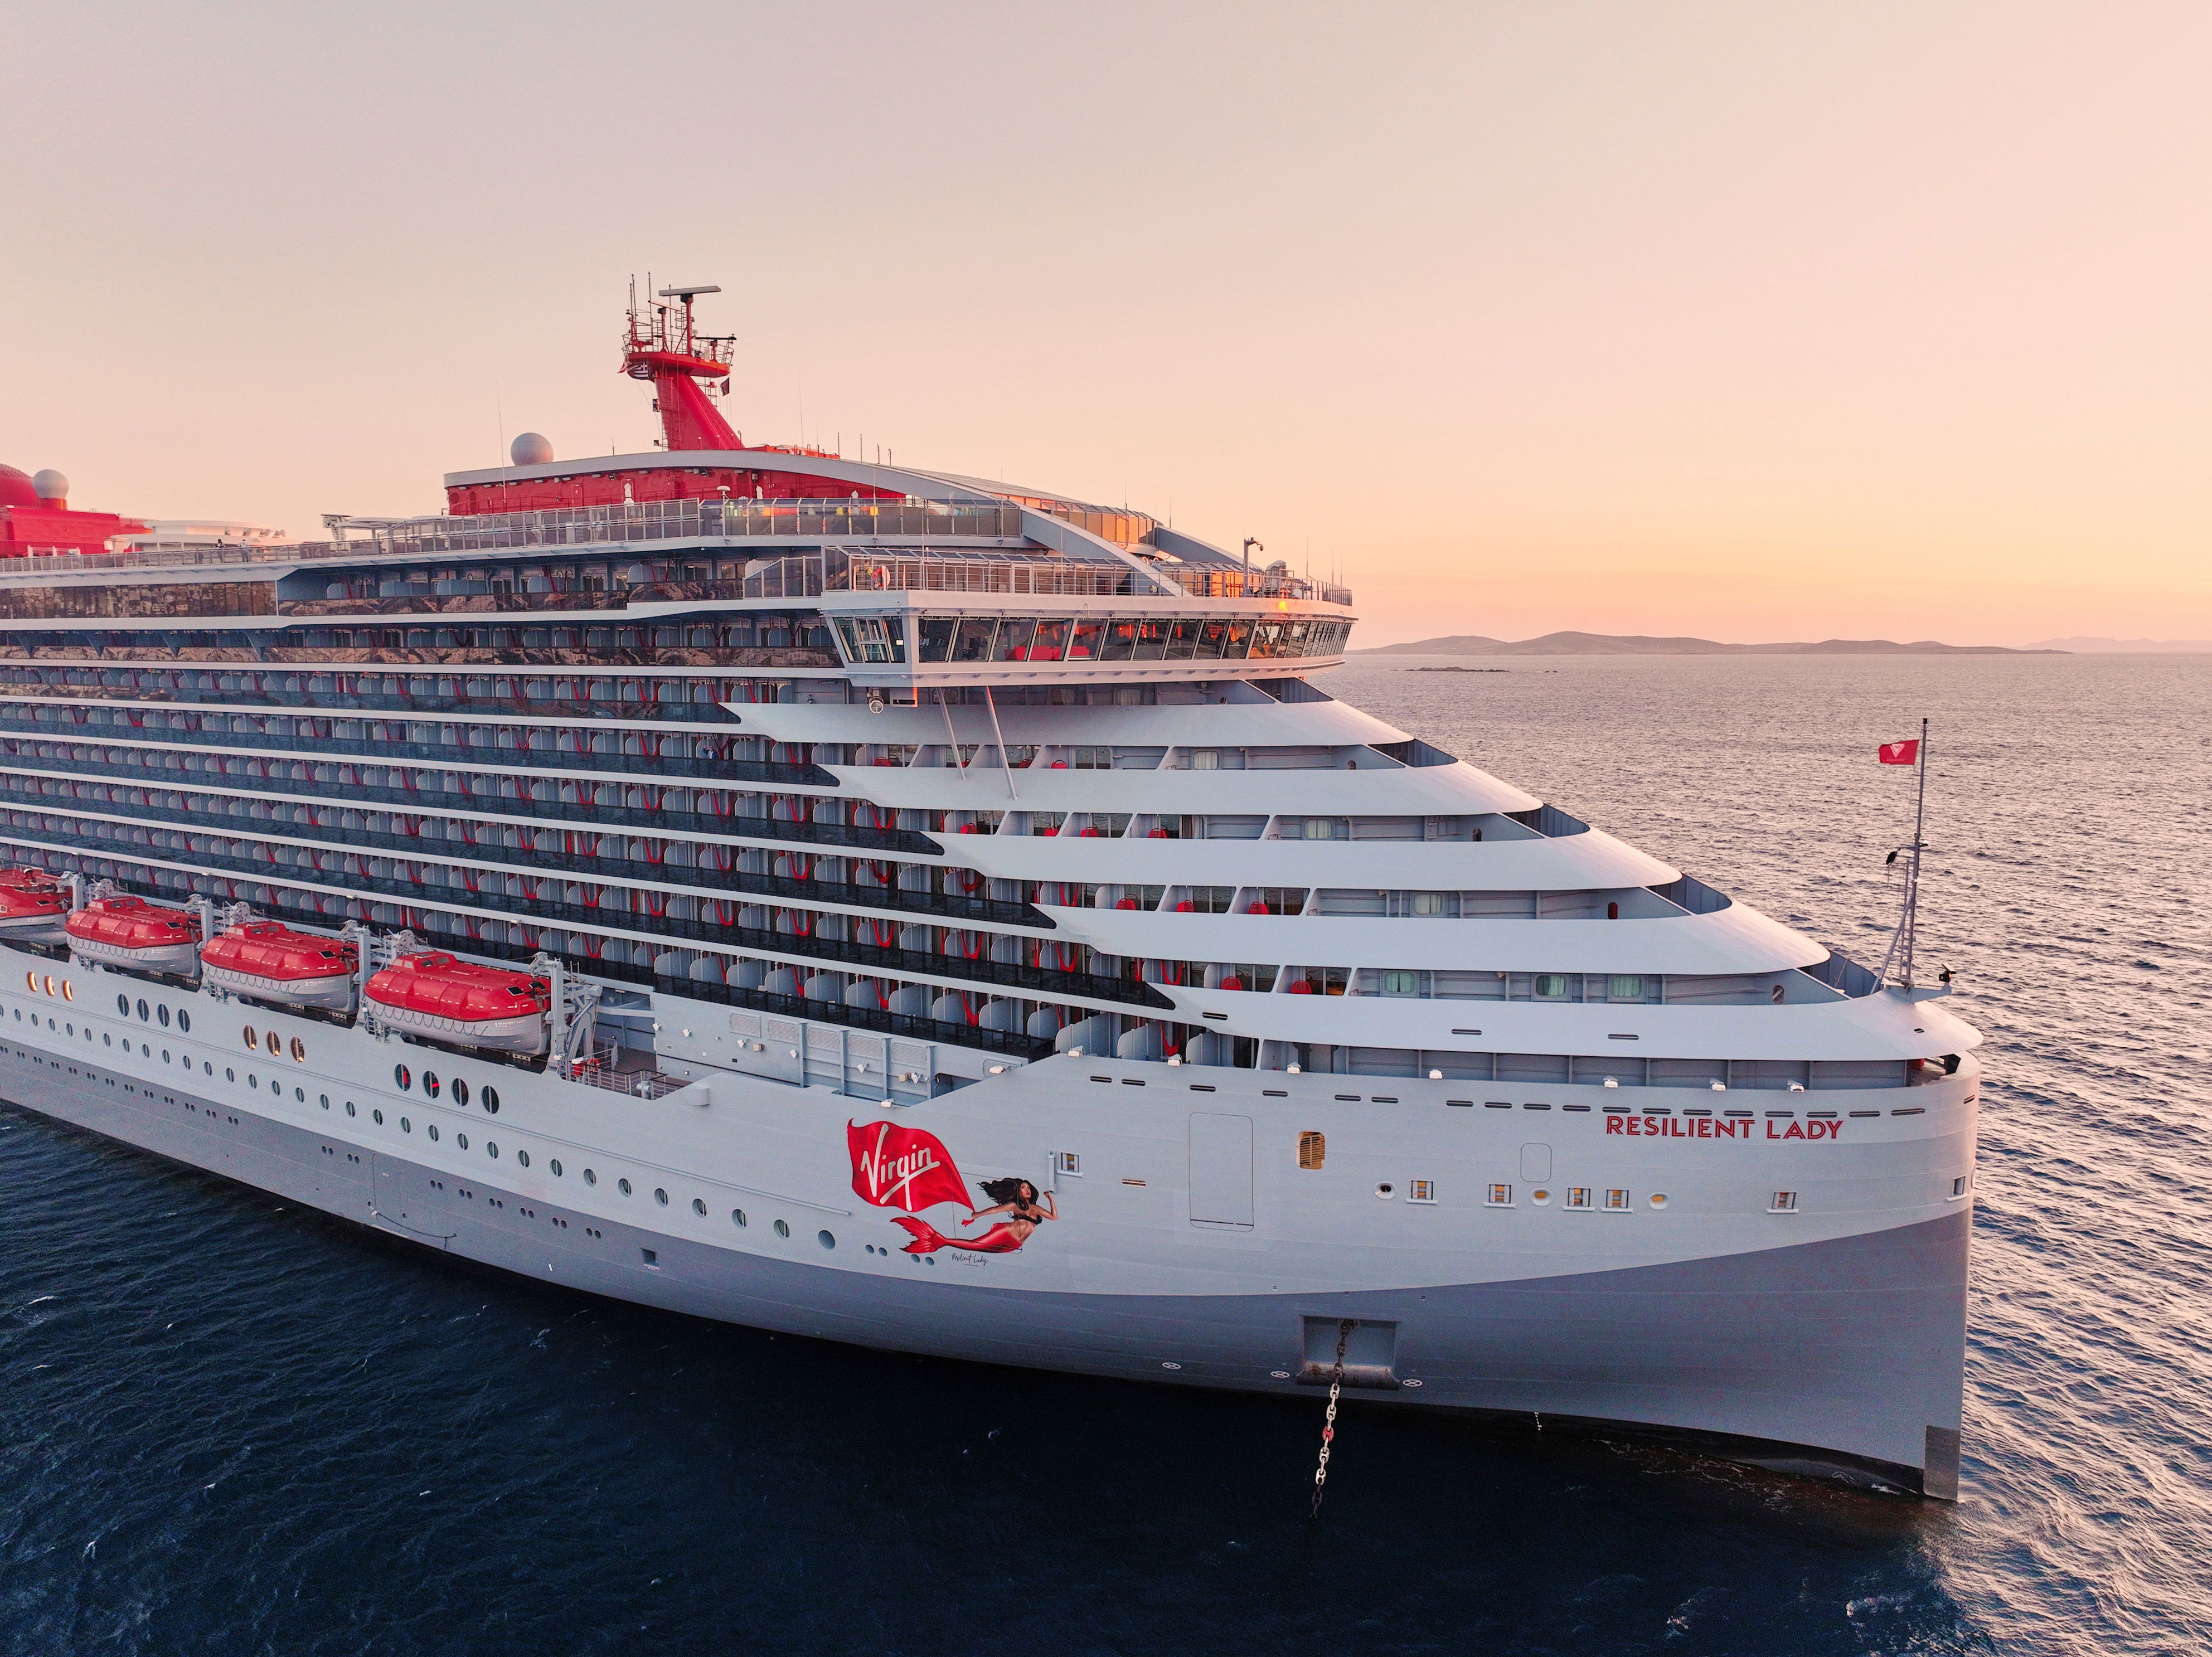 <p>If you want to cruise with the cool kids, book an adults-only <a href="https://www.cntraveler.com/story/virgin-voyages-hopes-to-appeal-to-virgin-cruisers-with-its-new-line?mbid=synd_msn_rss&utm_source=msn&utm_medium=syndication">Virgin Voyages</a> cruise. This line puts the hip in hipster; it calls cruisers <em>sailors</em>, is LGBTQ+-friendly, and attracts everyone from 20-something groups of friends to middle-aged-and-up couples. The premium line’s fares includes complimentary dining in a whopping 20 restaurants like Gunbae, a Korean bbq hotspot, WiFi, group fitness classes, and gratuities. Think high-energy happy campers, er, sailors, who celebrate with new tats done on board, many cocktails (don’t miss the Champagne Lounge), dance parties, pop-up circus performances, and hanging in port late-night. The three 2,770-passenger sister ships <a href="https://www.cntraveler.com/ships/virgin-voyages/scarlet-lady?mbid=synd_msn_rss&utm_source=msn&utm_medium=syndication"><em>Scarlet Lady</em></a>, <em><a href="https://www.cntraveler.com/ships/virgin-voyages/valiant-lady?mbid=synd_msn_rss&utm_source=msn&utm_medium=syndication">Valiant Lady</a>,</em> and <a href="https://www.cntraveler.com/ships/virgin-voyages/resilient-lady?mbid=synd_msn_rss&utm_source=msn&utm_medium=syndication"><em>Resilient Lady</em></a> sail the Caribbean and Med.</p> <p><strong>The sailing to take this year:</strong> Find fast fun on <em>Scarlet Lady</em> five-day roundtrip Miami cruises, like “Fire and Sunset Soirées,” with a private Beach Club experience in Bimini, <a href="https://www.cntraveler.com/story/where-to-eat-stay-and-play-in-the-bahamas?mbid=synd_msn_rss&utm_source=msn&utm_medium=syndication">Bahamas</a>; it’s abuzz with private cabanas, beach bonfires, and floaty pool parties. <em>Departures March 20, April 17, May 1, December 11, from <a href="https://www.virginvoyages.com/itinerary/caribbean/fire-sunset-4-day-cruises-key-west">$1,620 per person</a>.</em></p><p>Sign up to receive the latest news, expert tips, and inspiration on all things travel</p><a href="https://www.cntraveler.com/newsletter/the-daily?sourceCode=msnsend">Inspire Me</a>